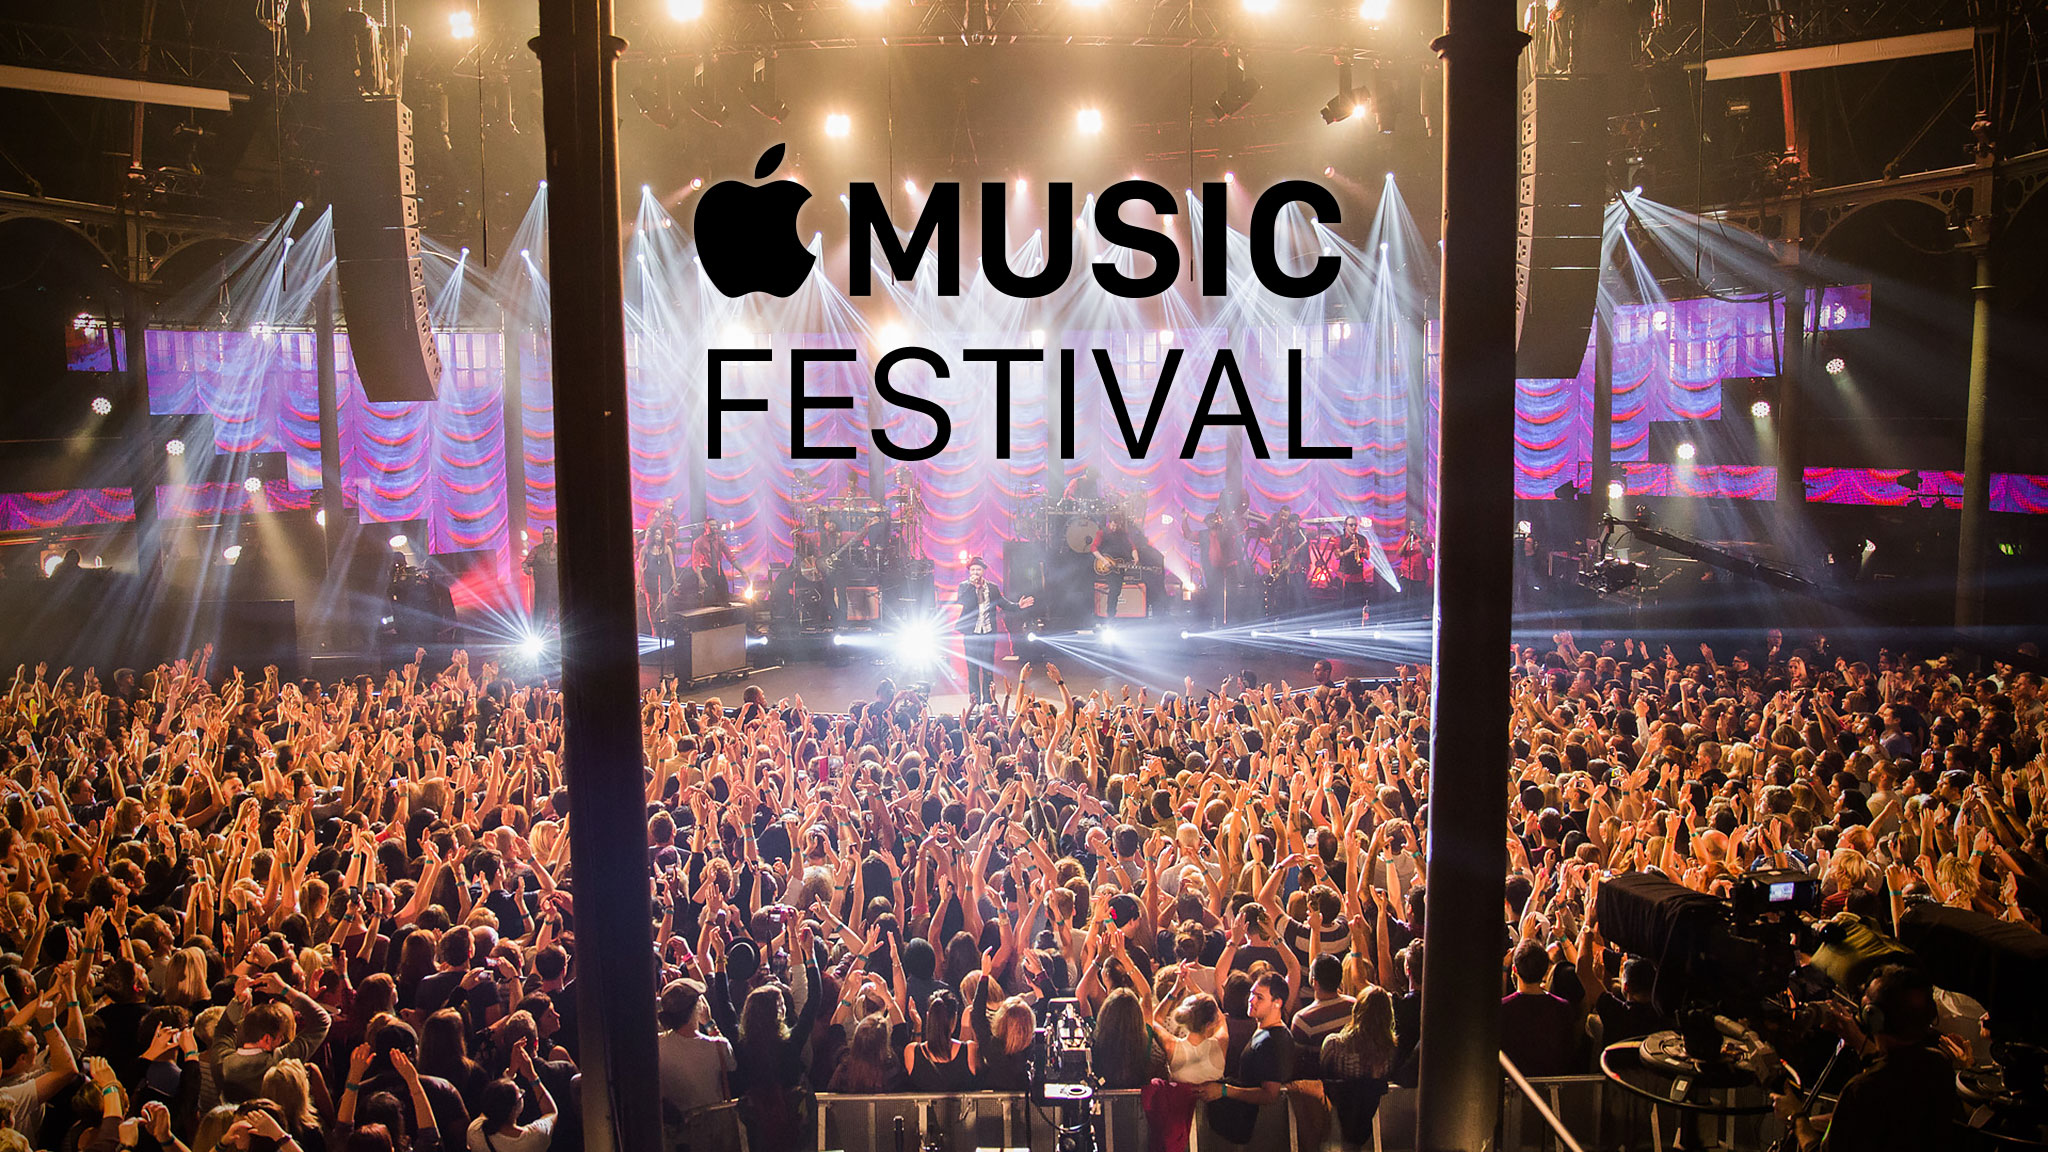 Adorable Apple Music Wallpapers In High Quality, Alvina - Apple Music Festival - HD Wallpaper 